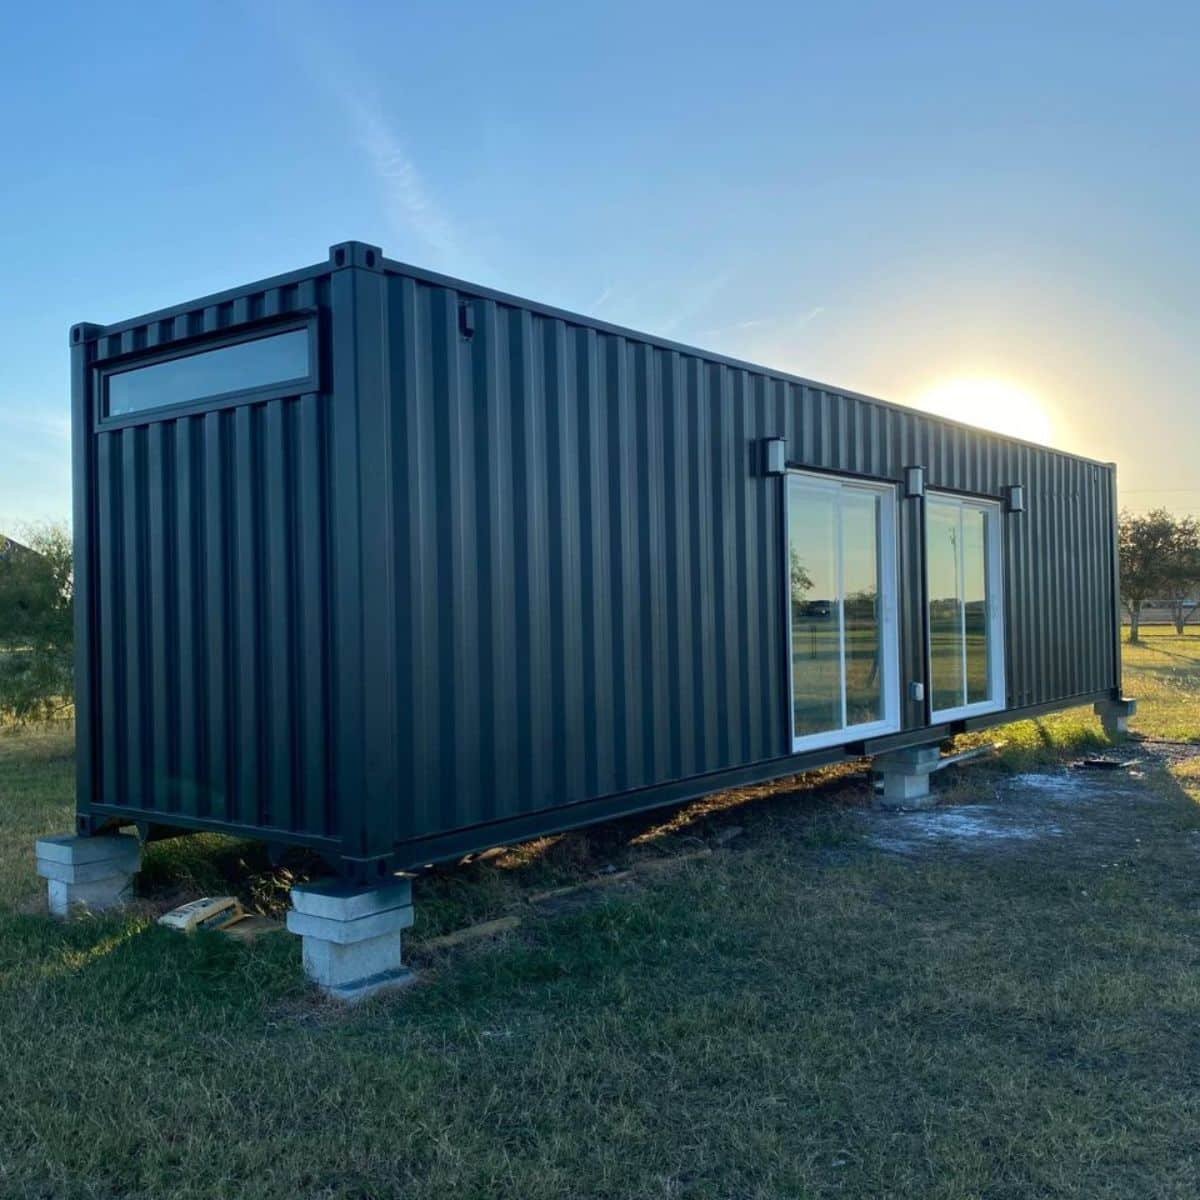 Luxury Container Home Is the Perfect Airbnb for Some Extra $$